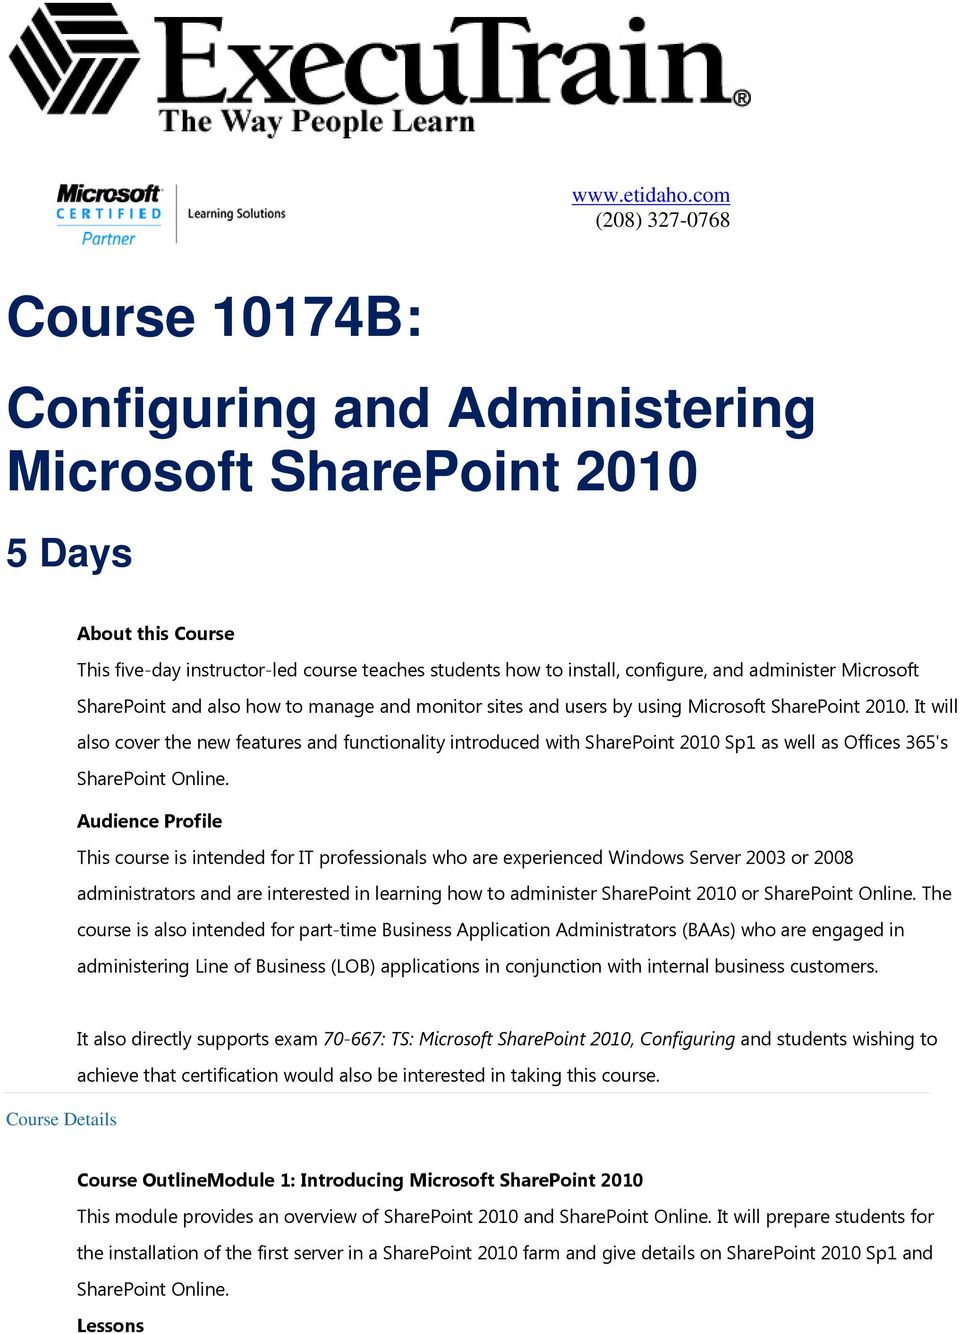 administer Microsoft SharePoint and also how to manage and monitor sites and users by using Microsoft SharePoint 2010.